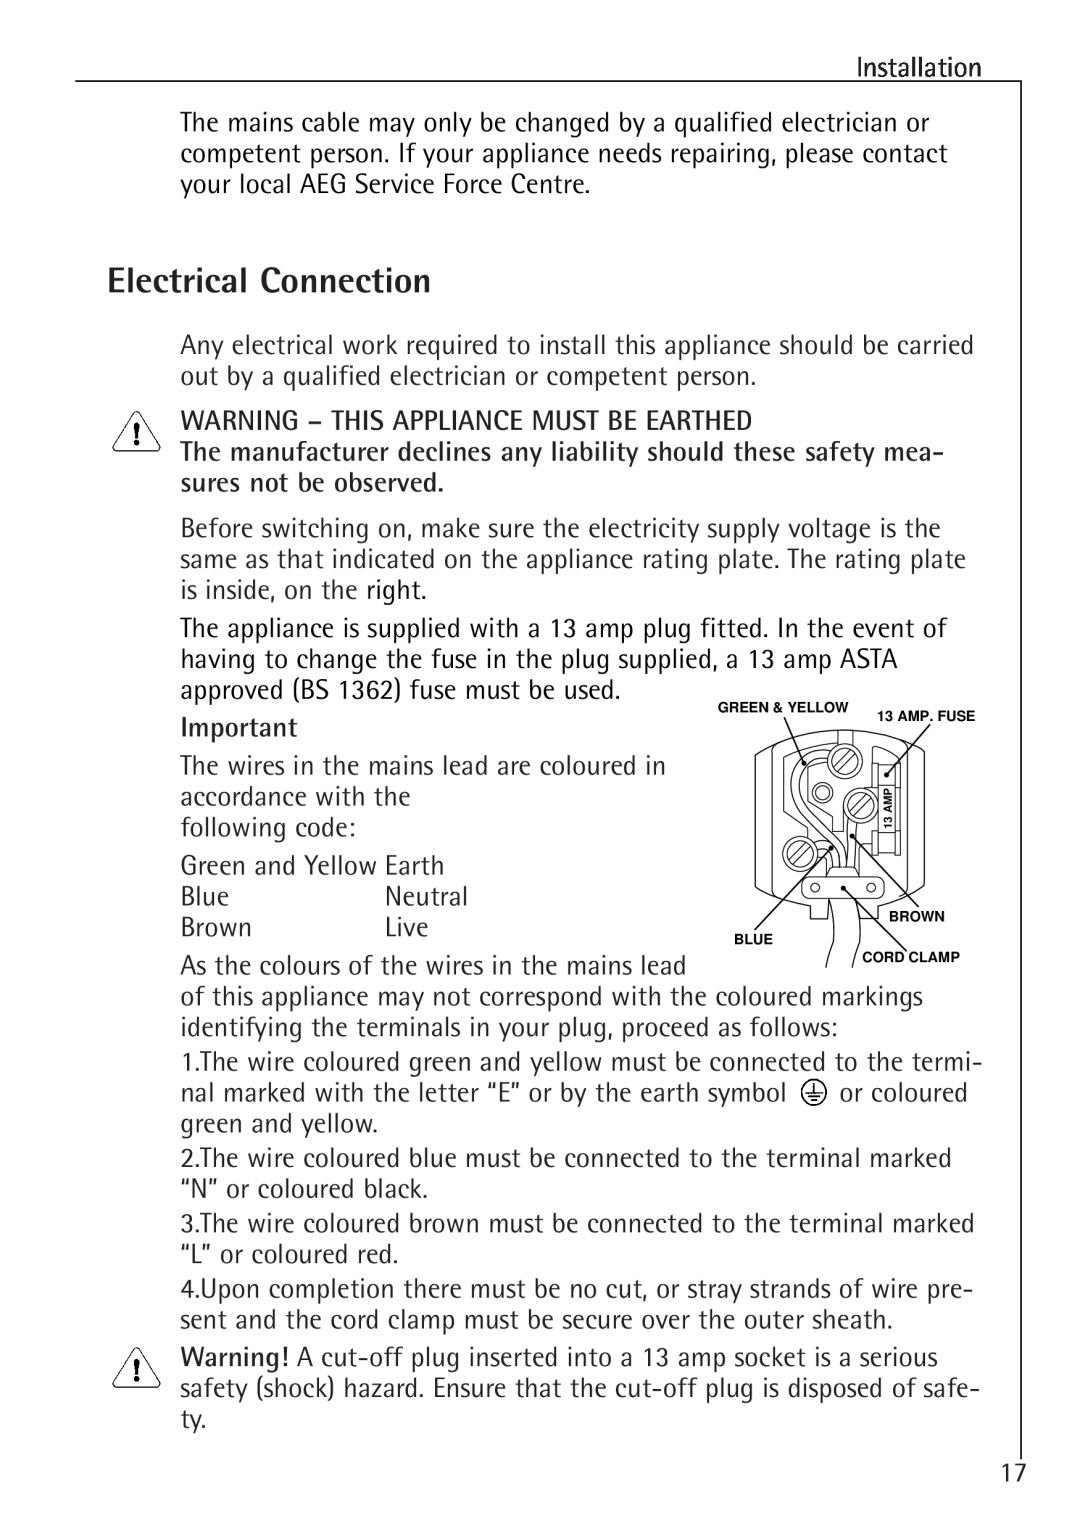 Electrolux SANTO U 86040 i installation instructions Electrical Connection, Warning - This Appliance Must Be Earthed 